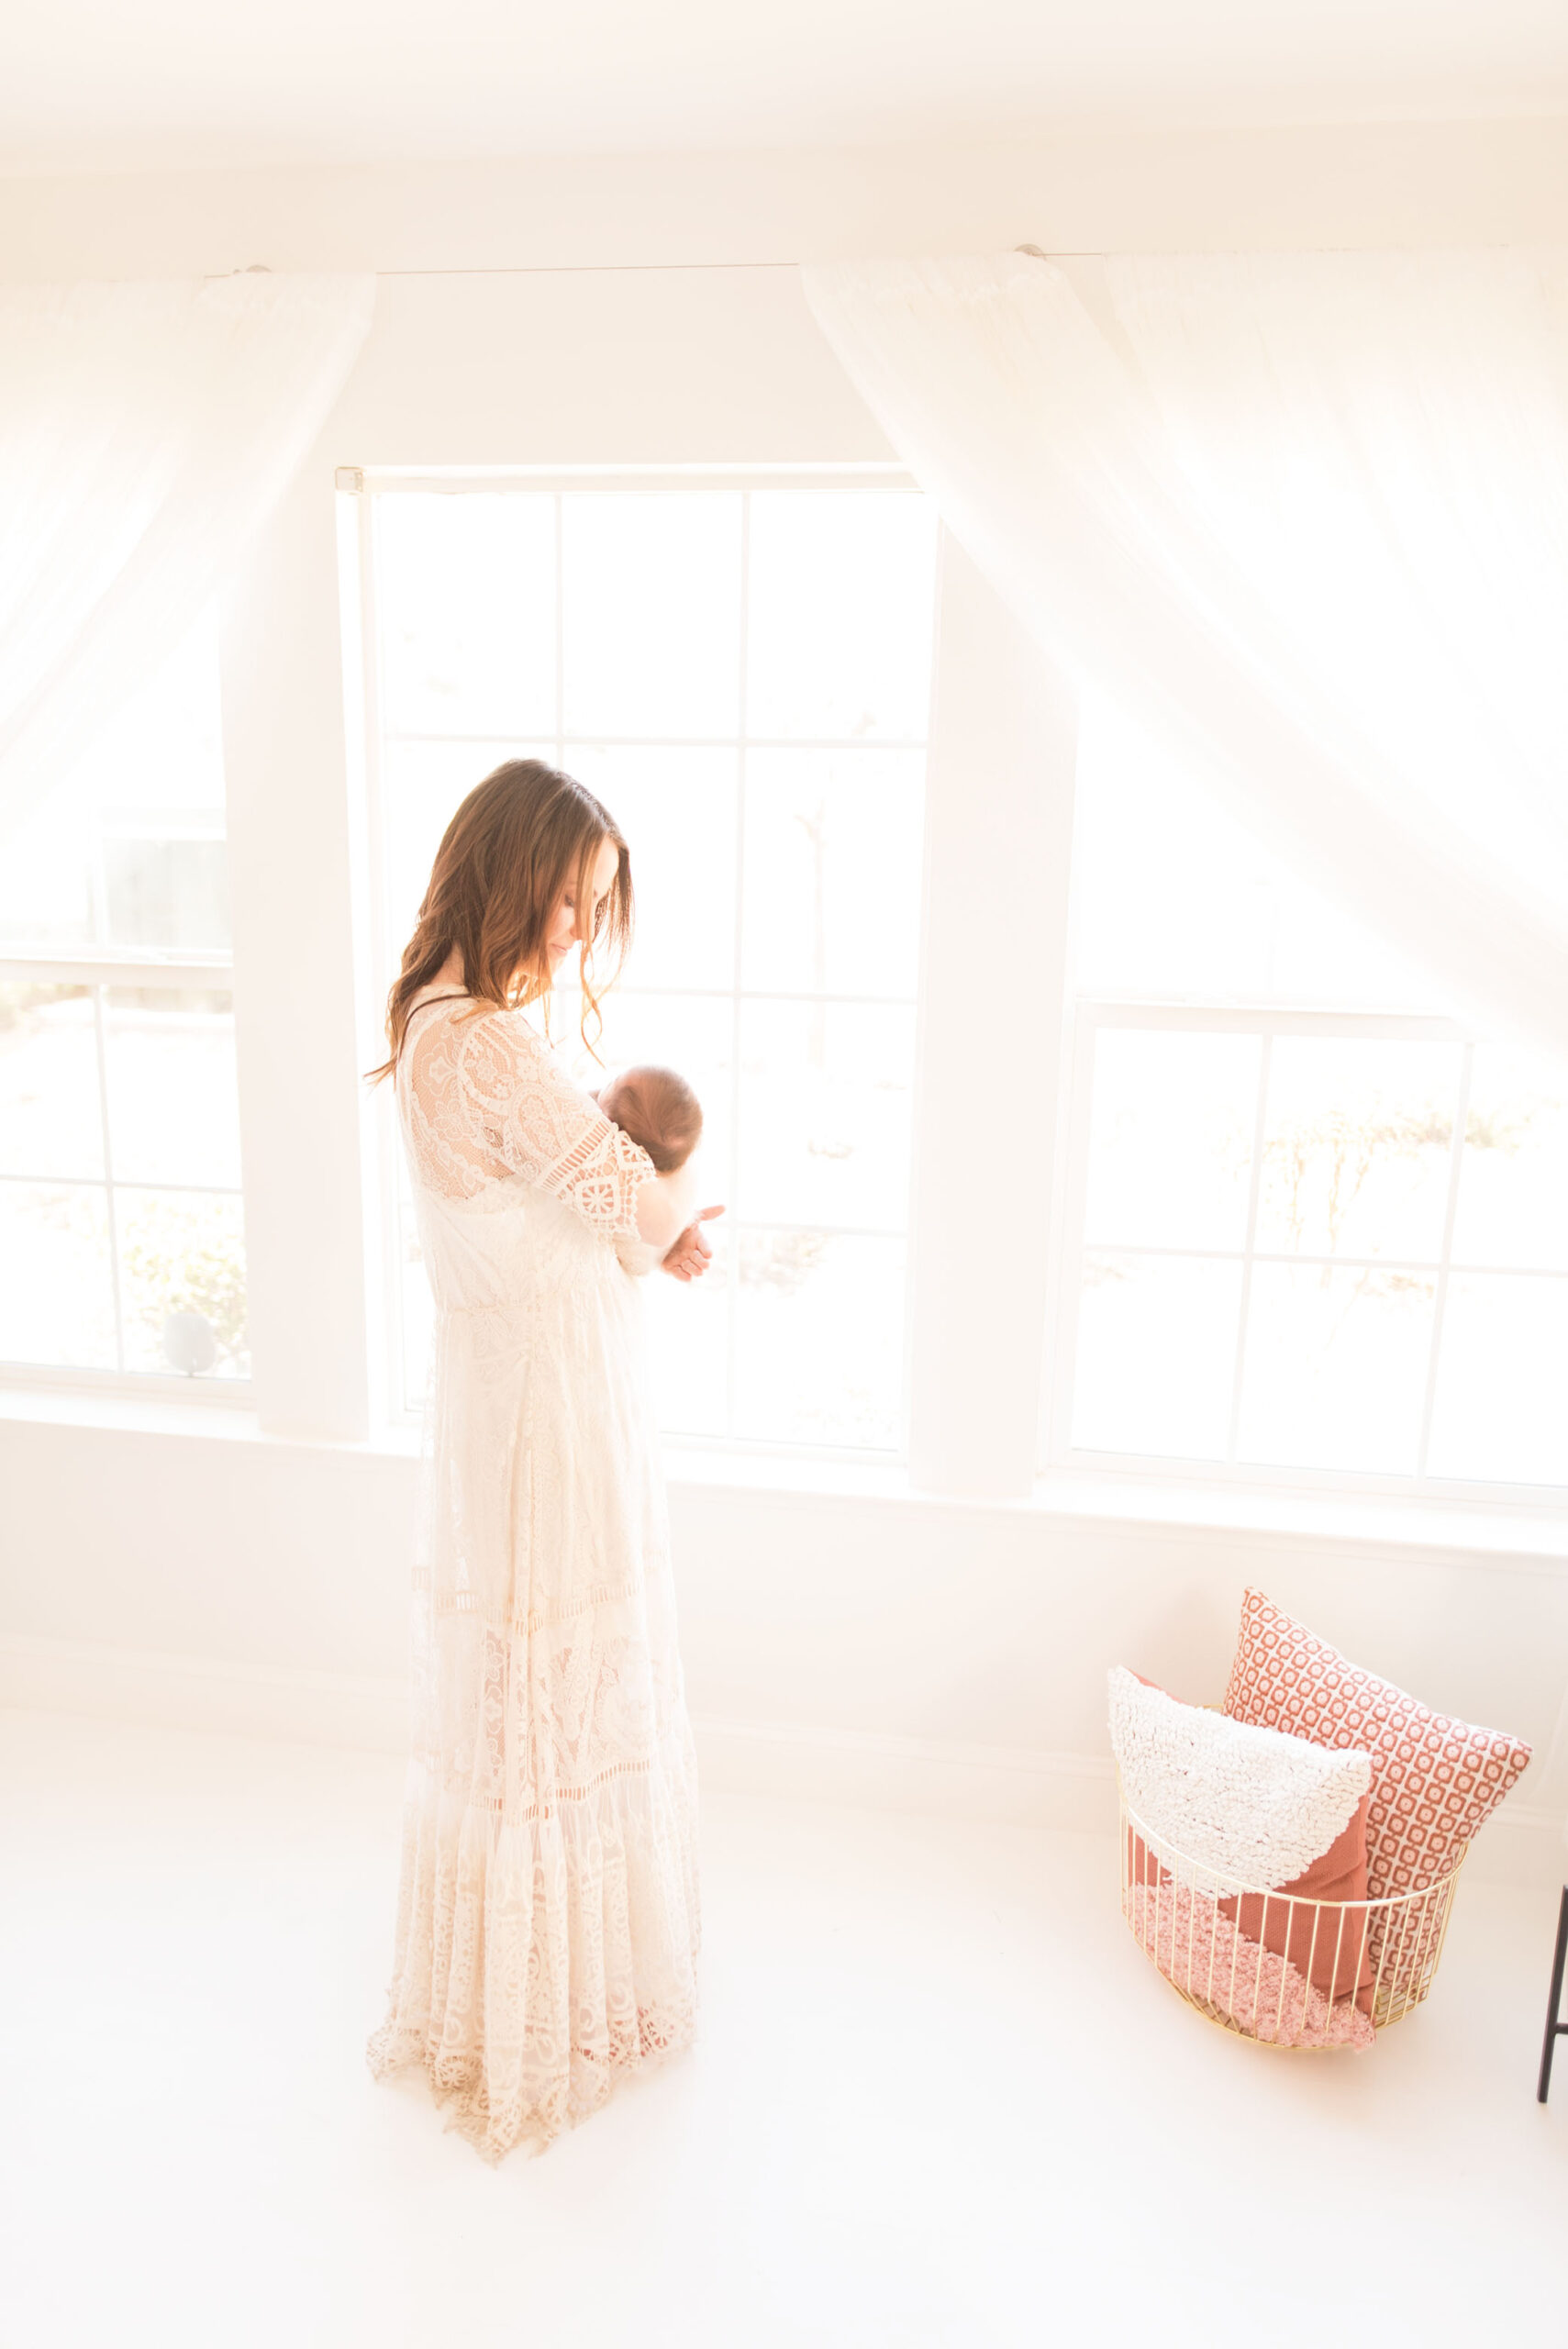 A mother stands by a window with tons of light holding her newborn. 